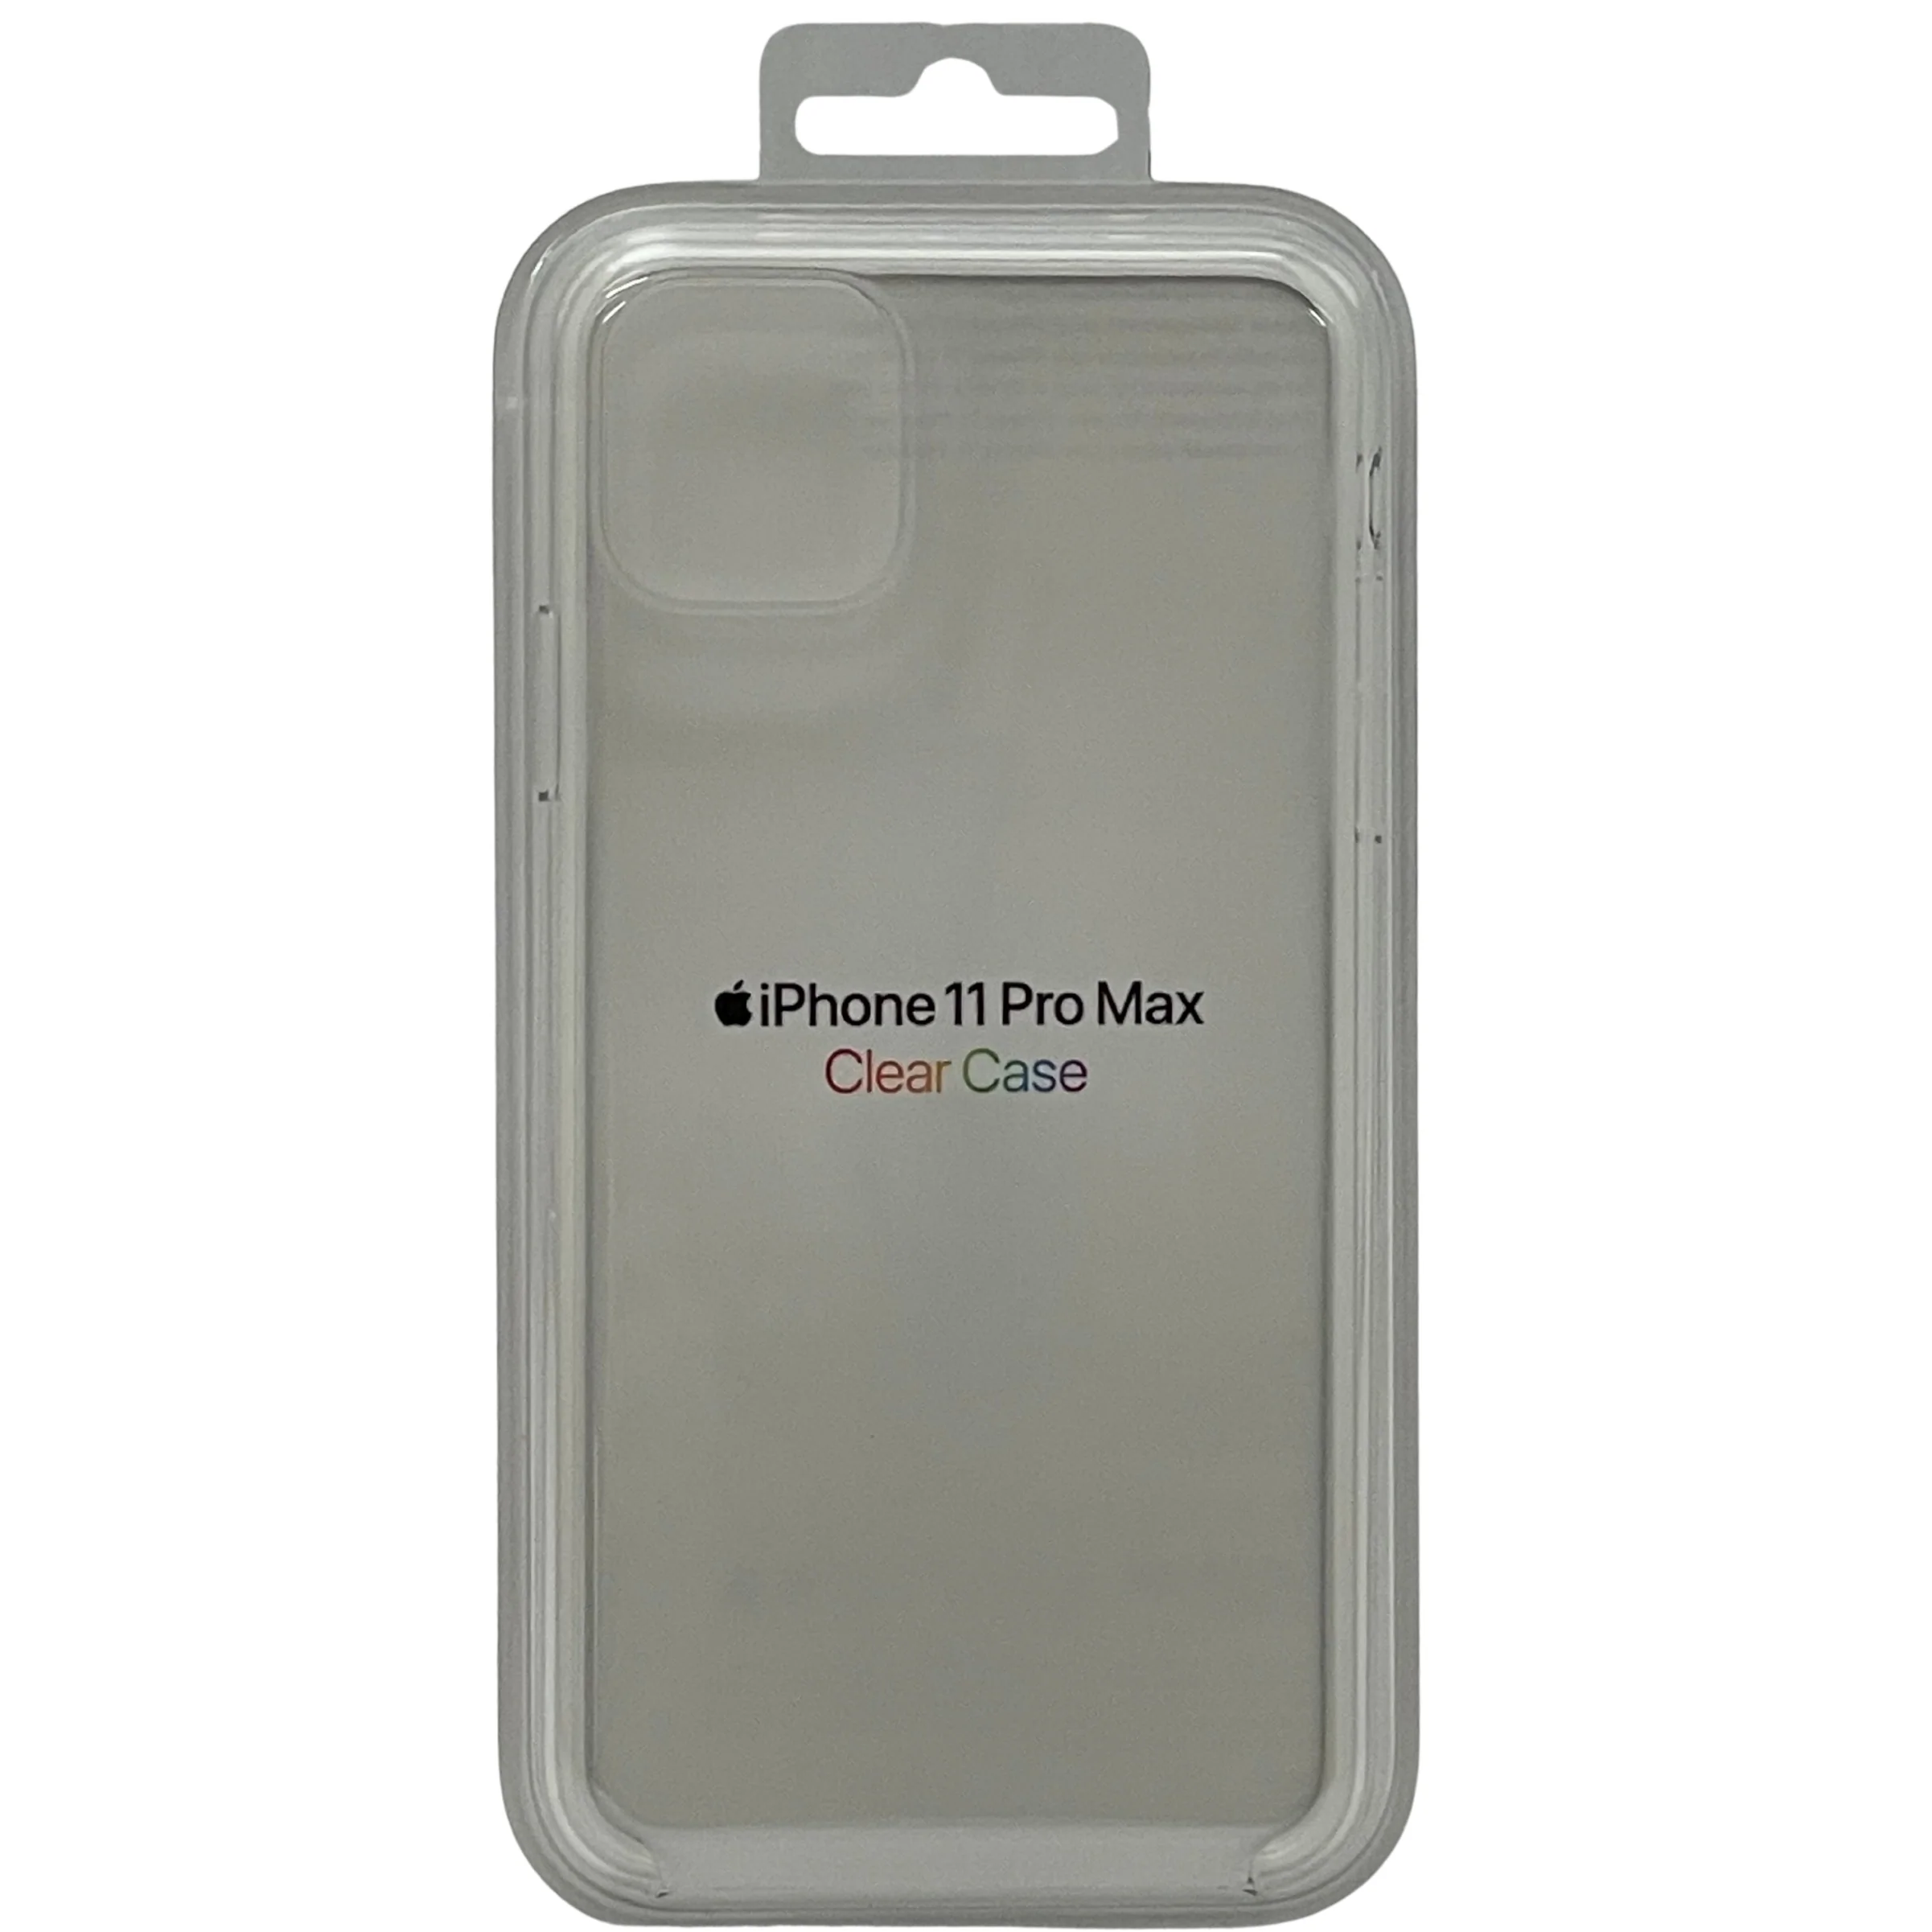 Apple iPhone Clear Case / iPhone 11 Pro Max / iPhone Accessories